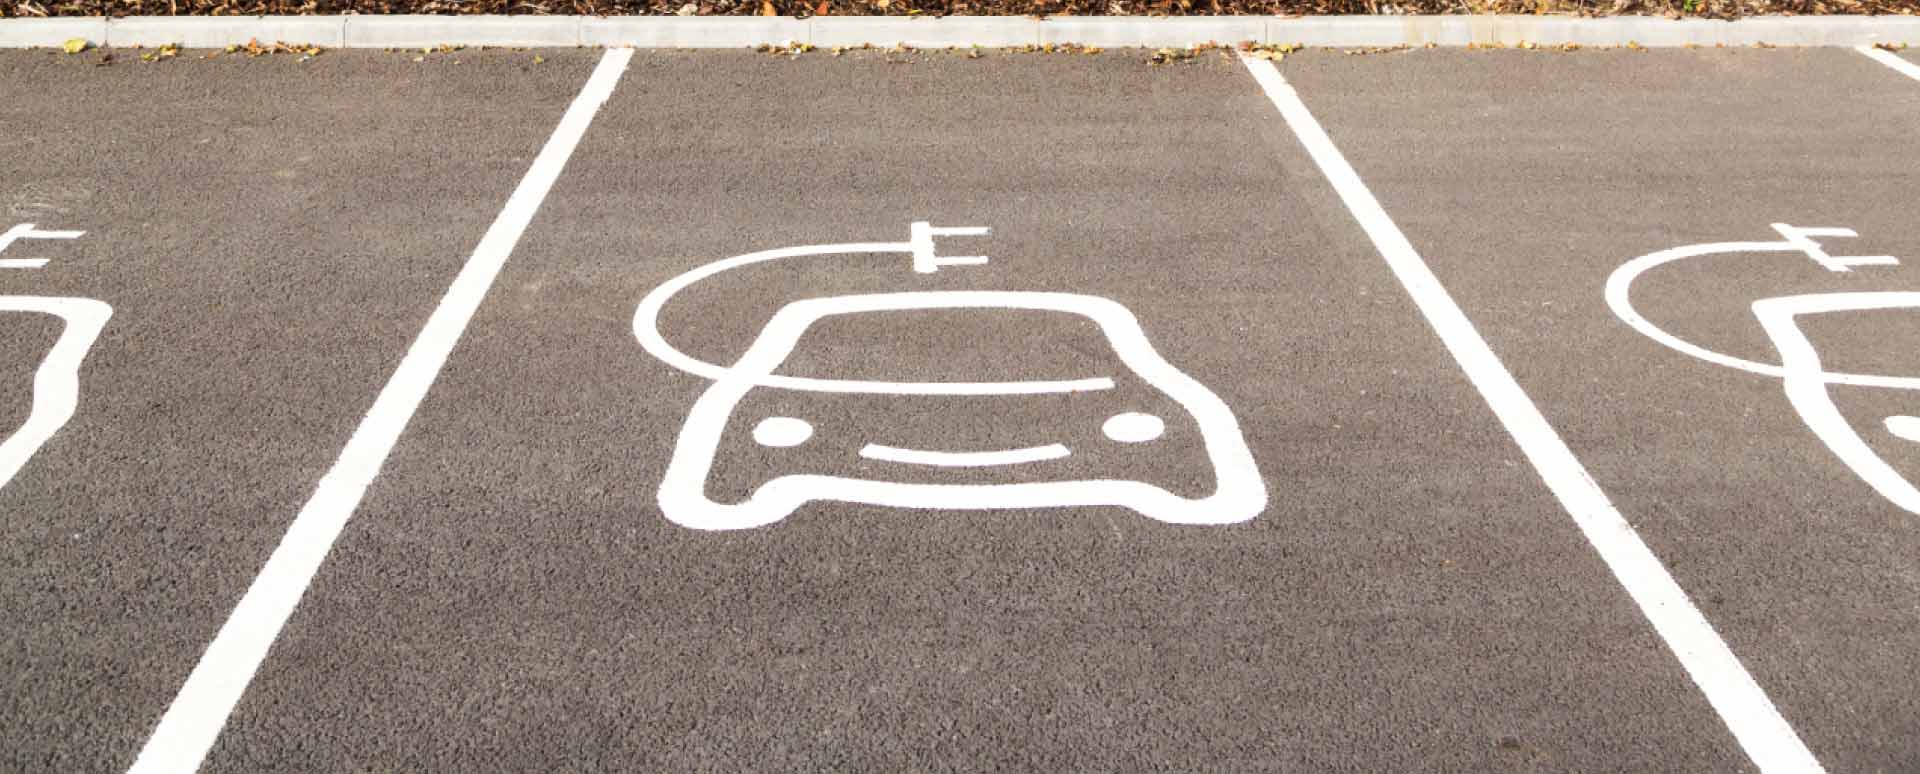 Electric Vehicle Icon In Parking Space